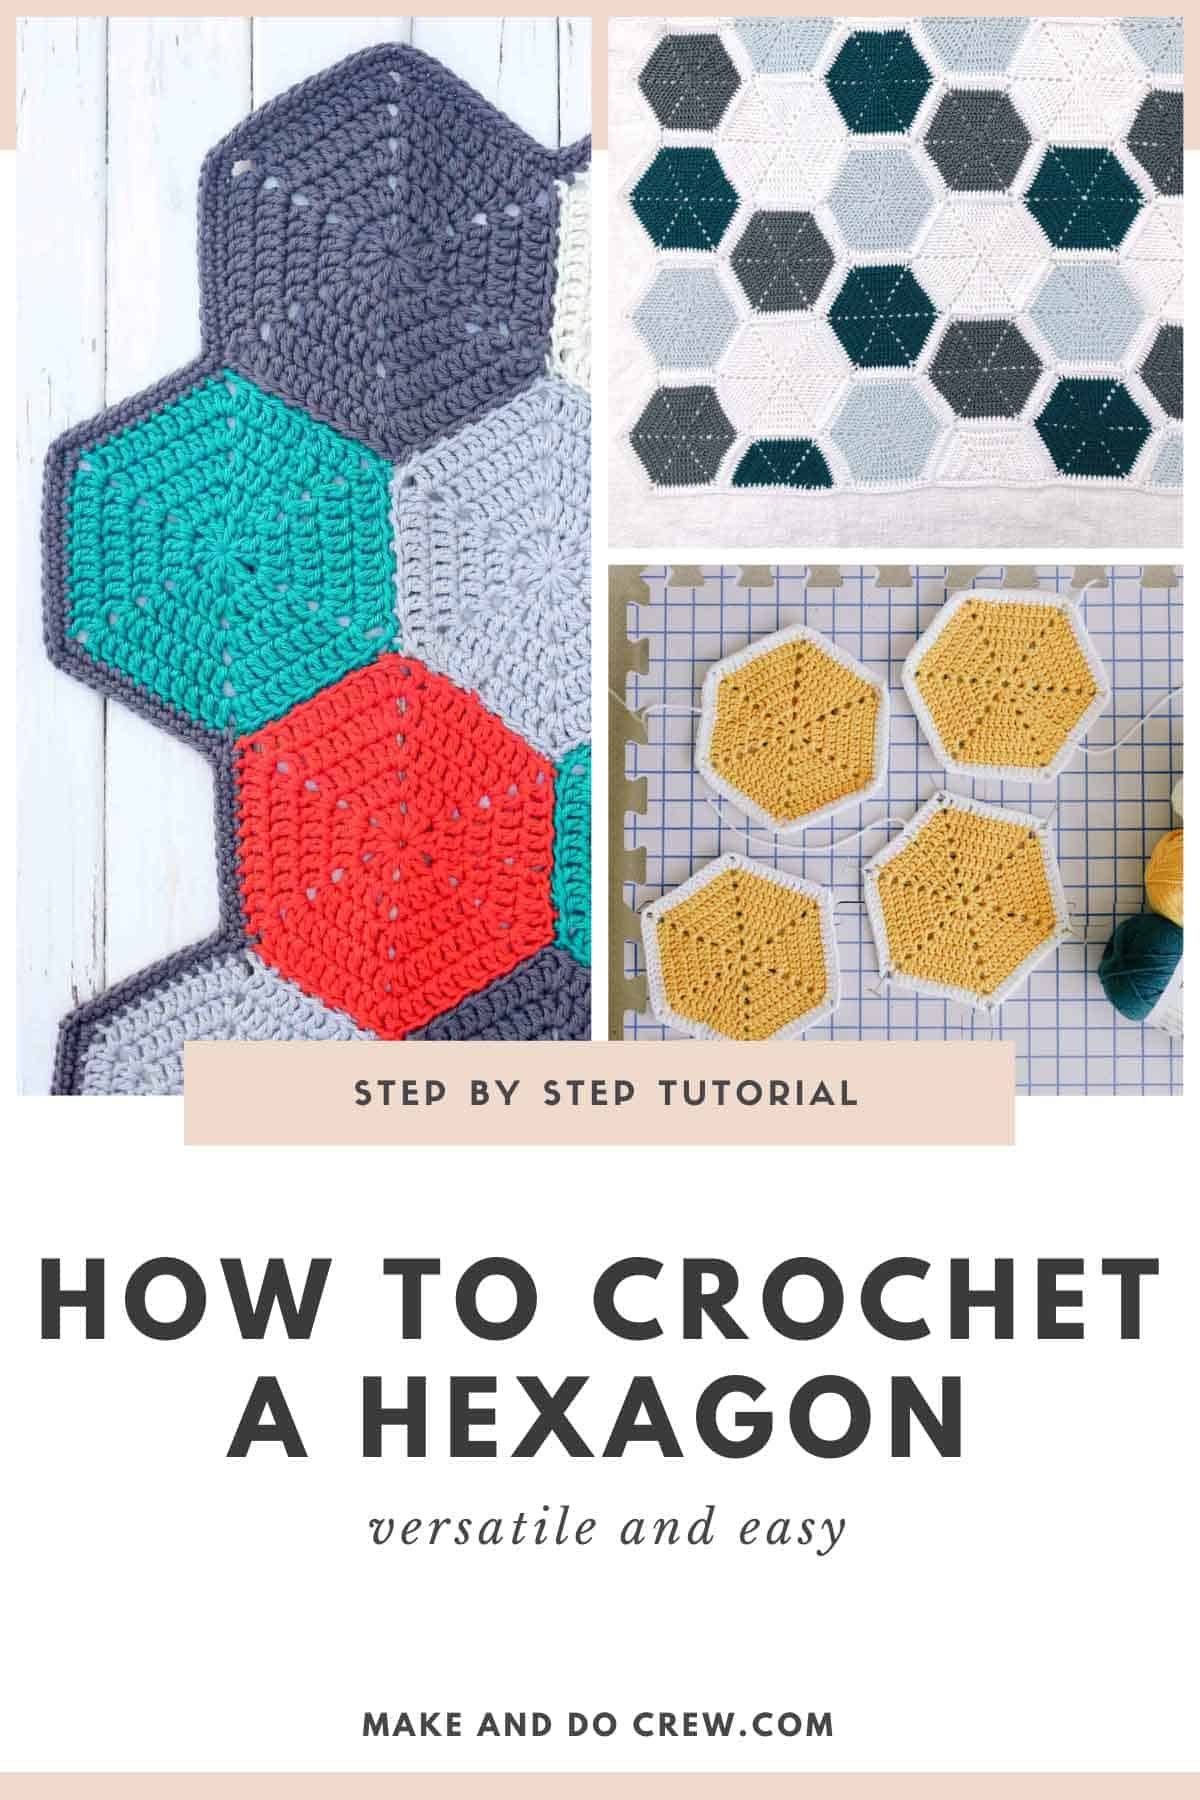 A 3-photo grid of different ways and colors to crochet a hexagon that is versatile and easy.